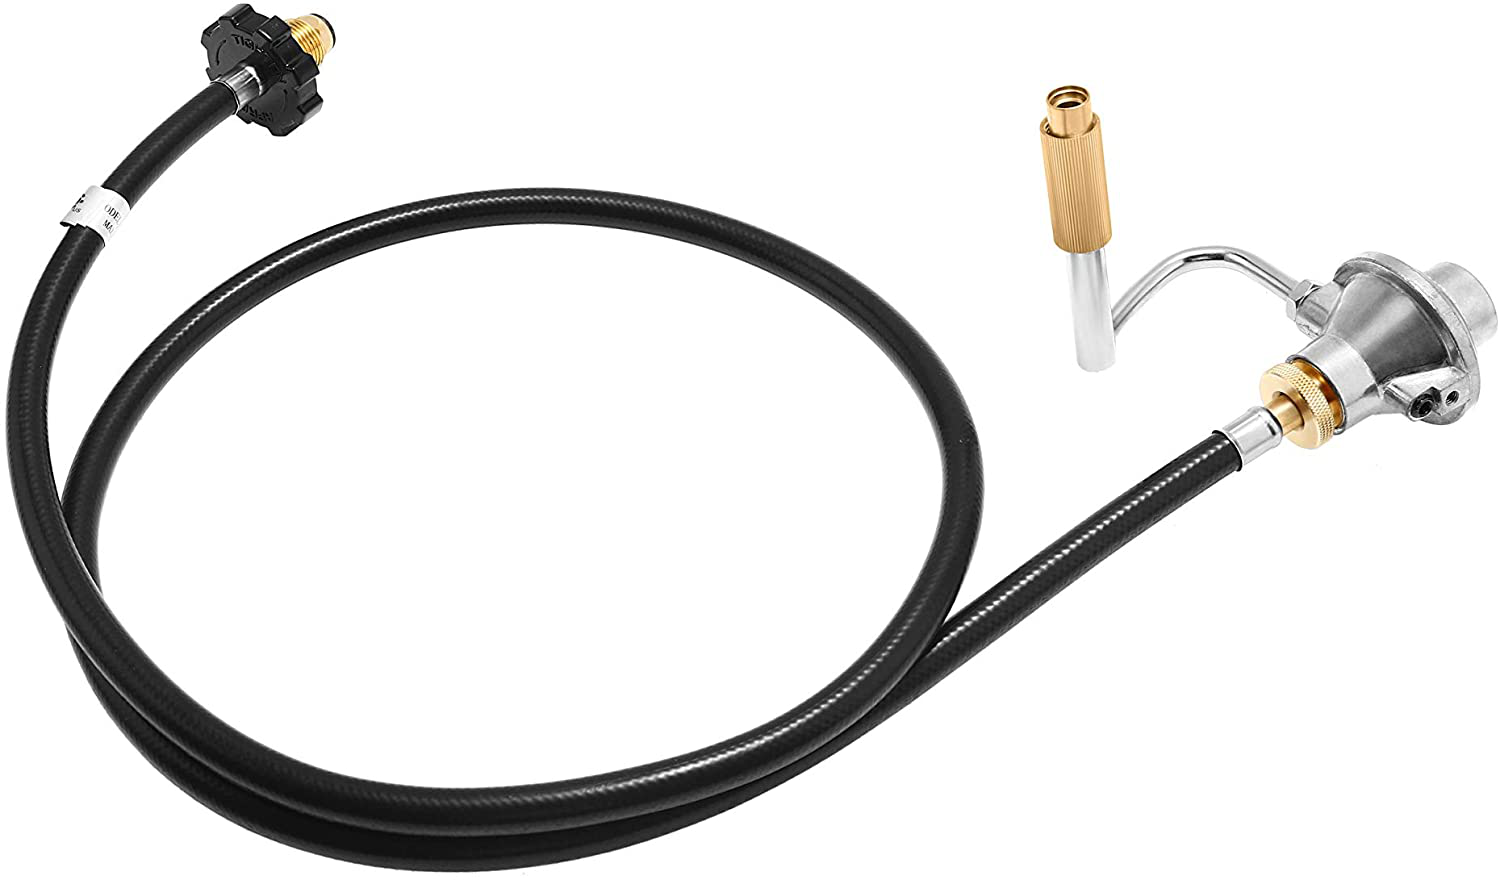 Primary image for Grill 5 Ft Propane Adapter Hose Converter For Coleman Roadtrip Portable Grill